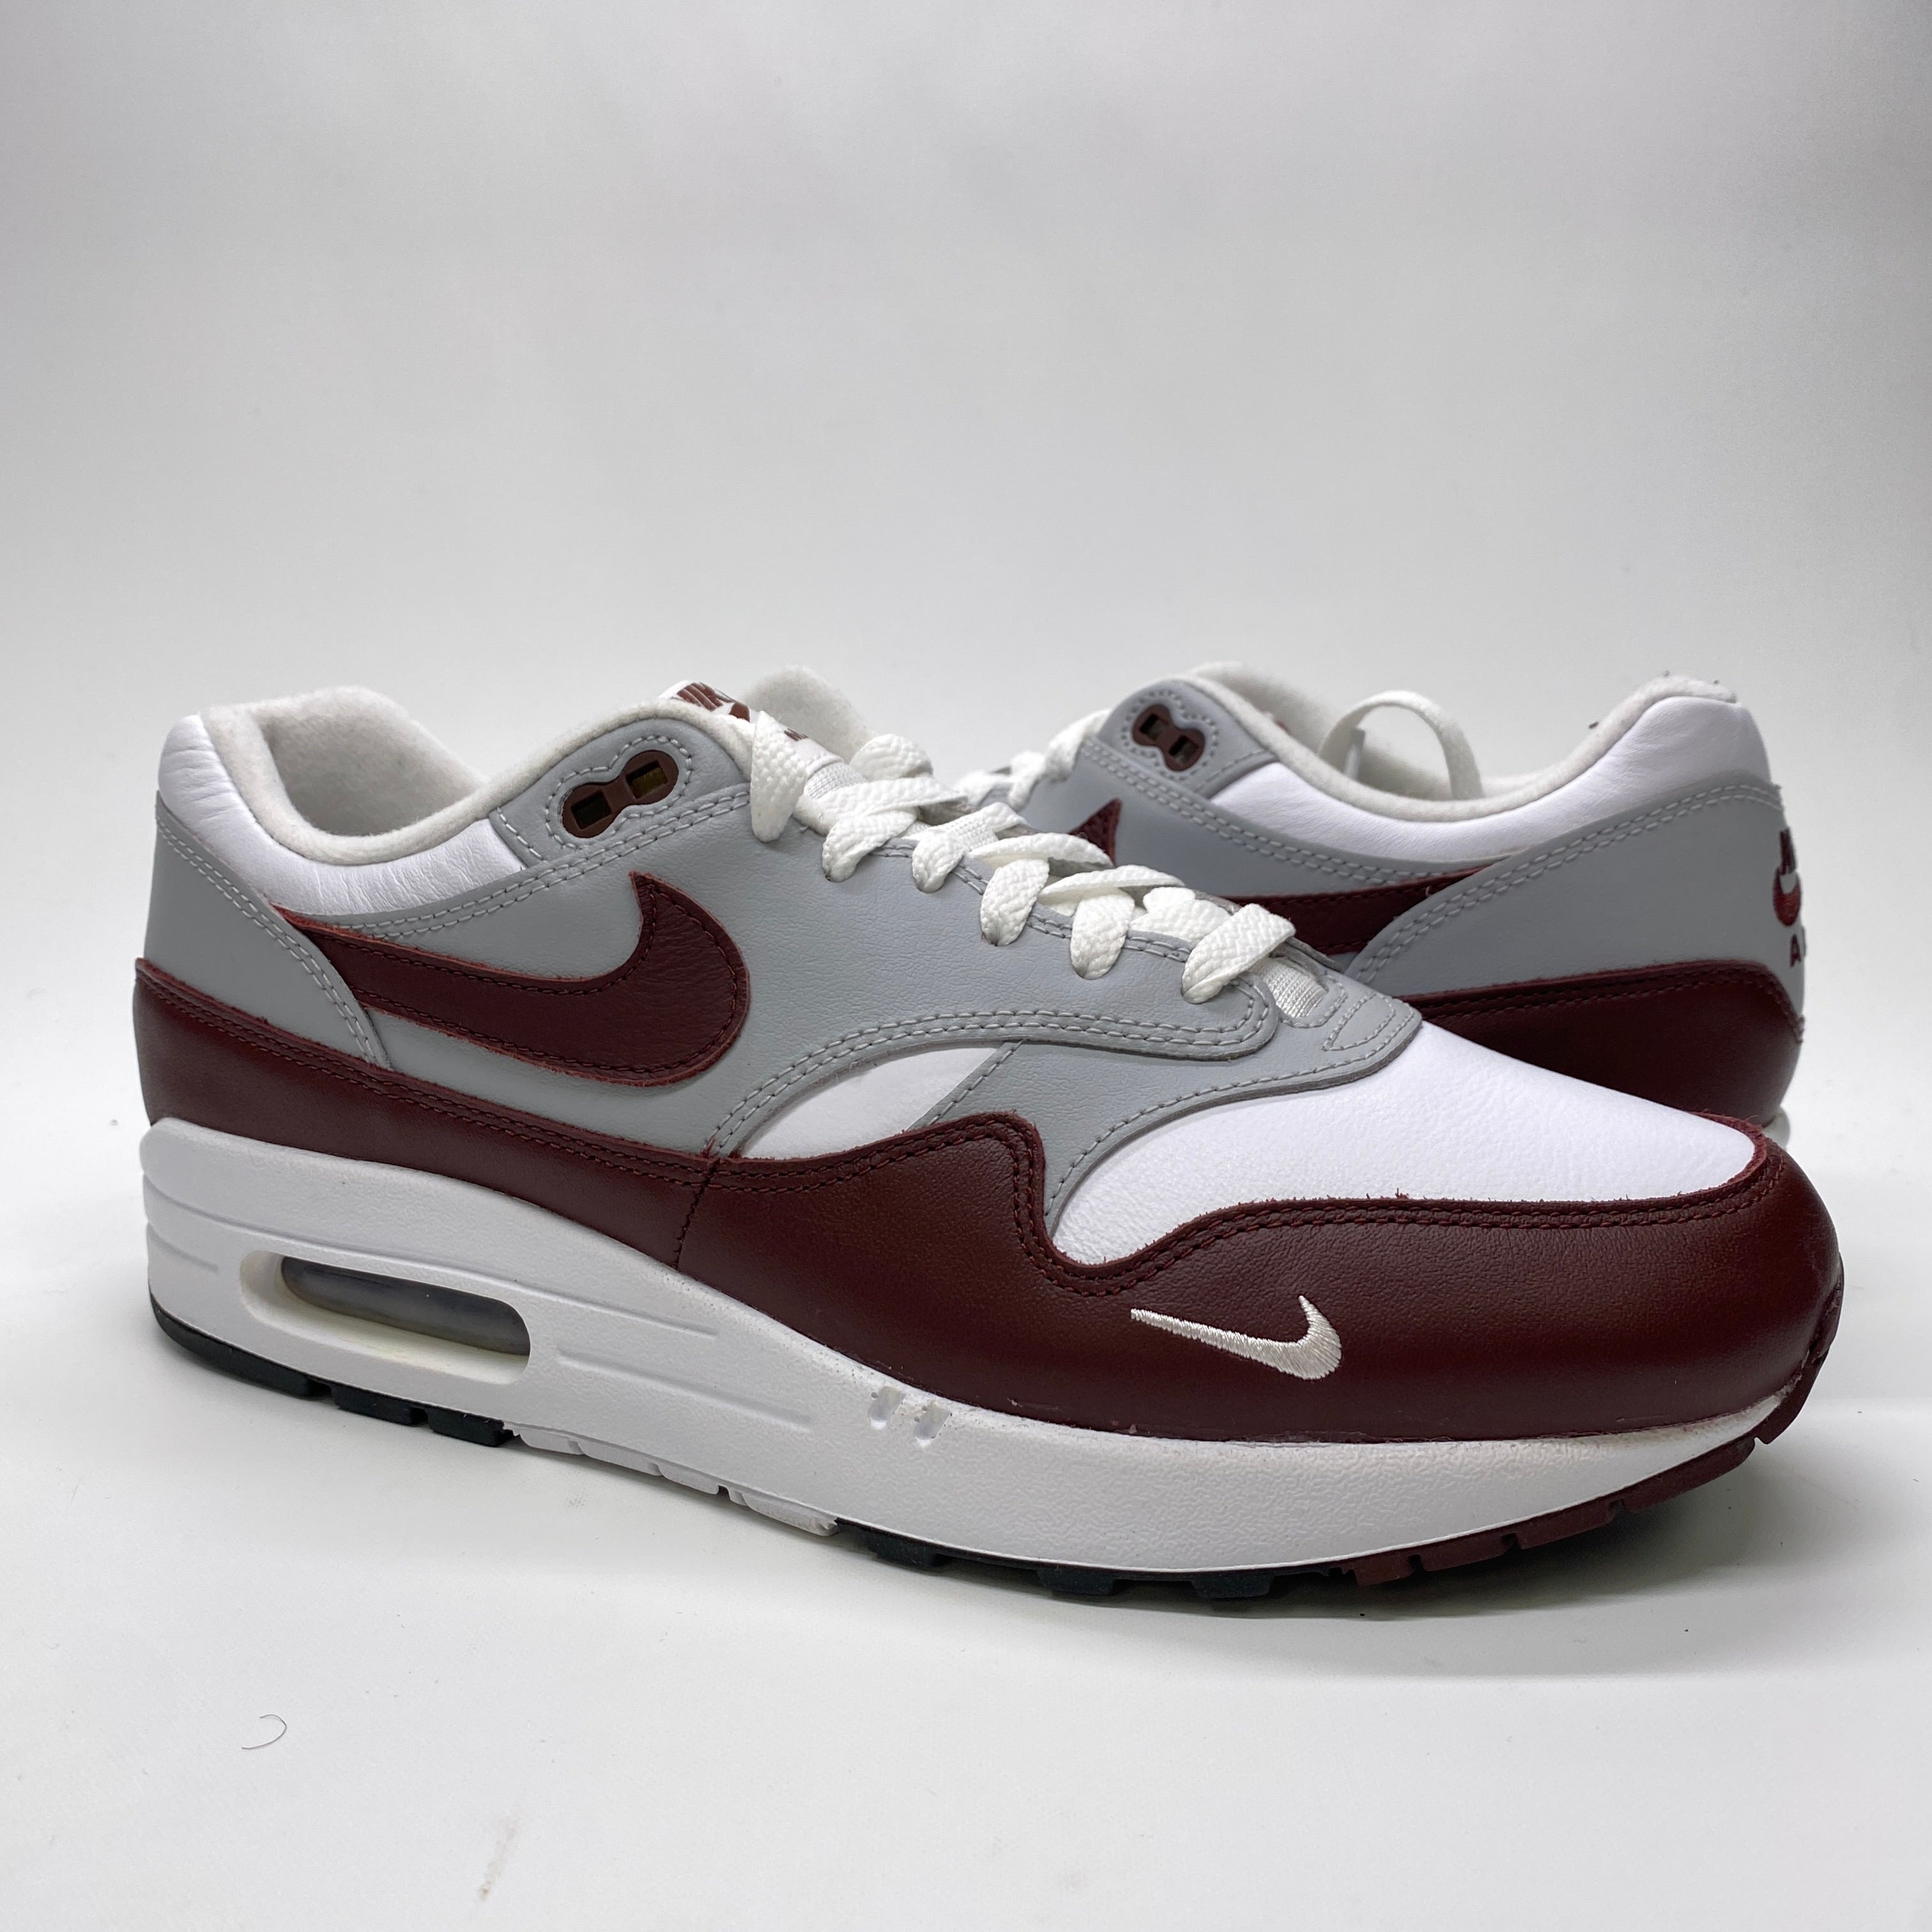 Nike Air Max 1 "Mystic Dates" 2020 Used Size 9.5